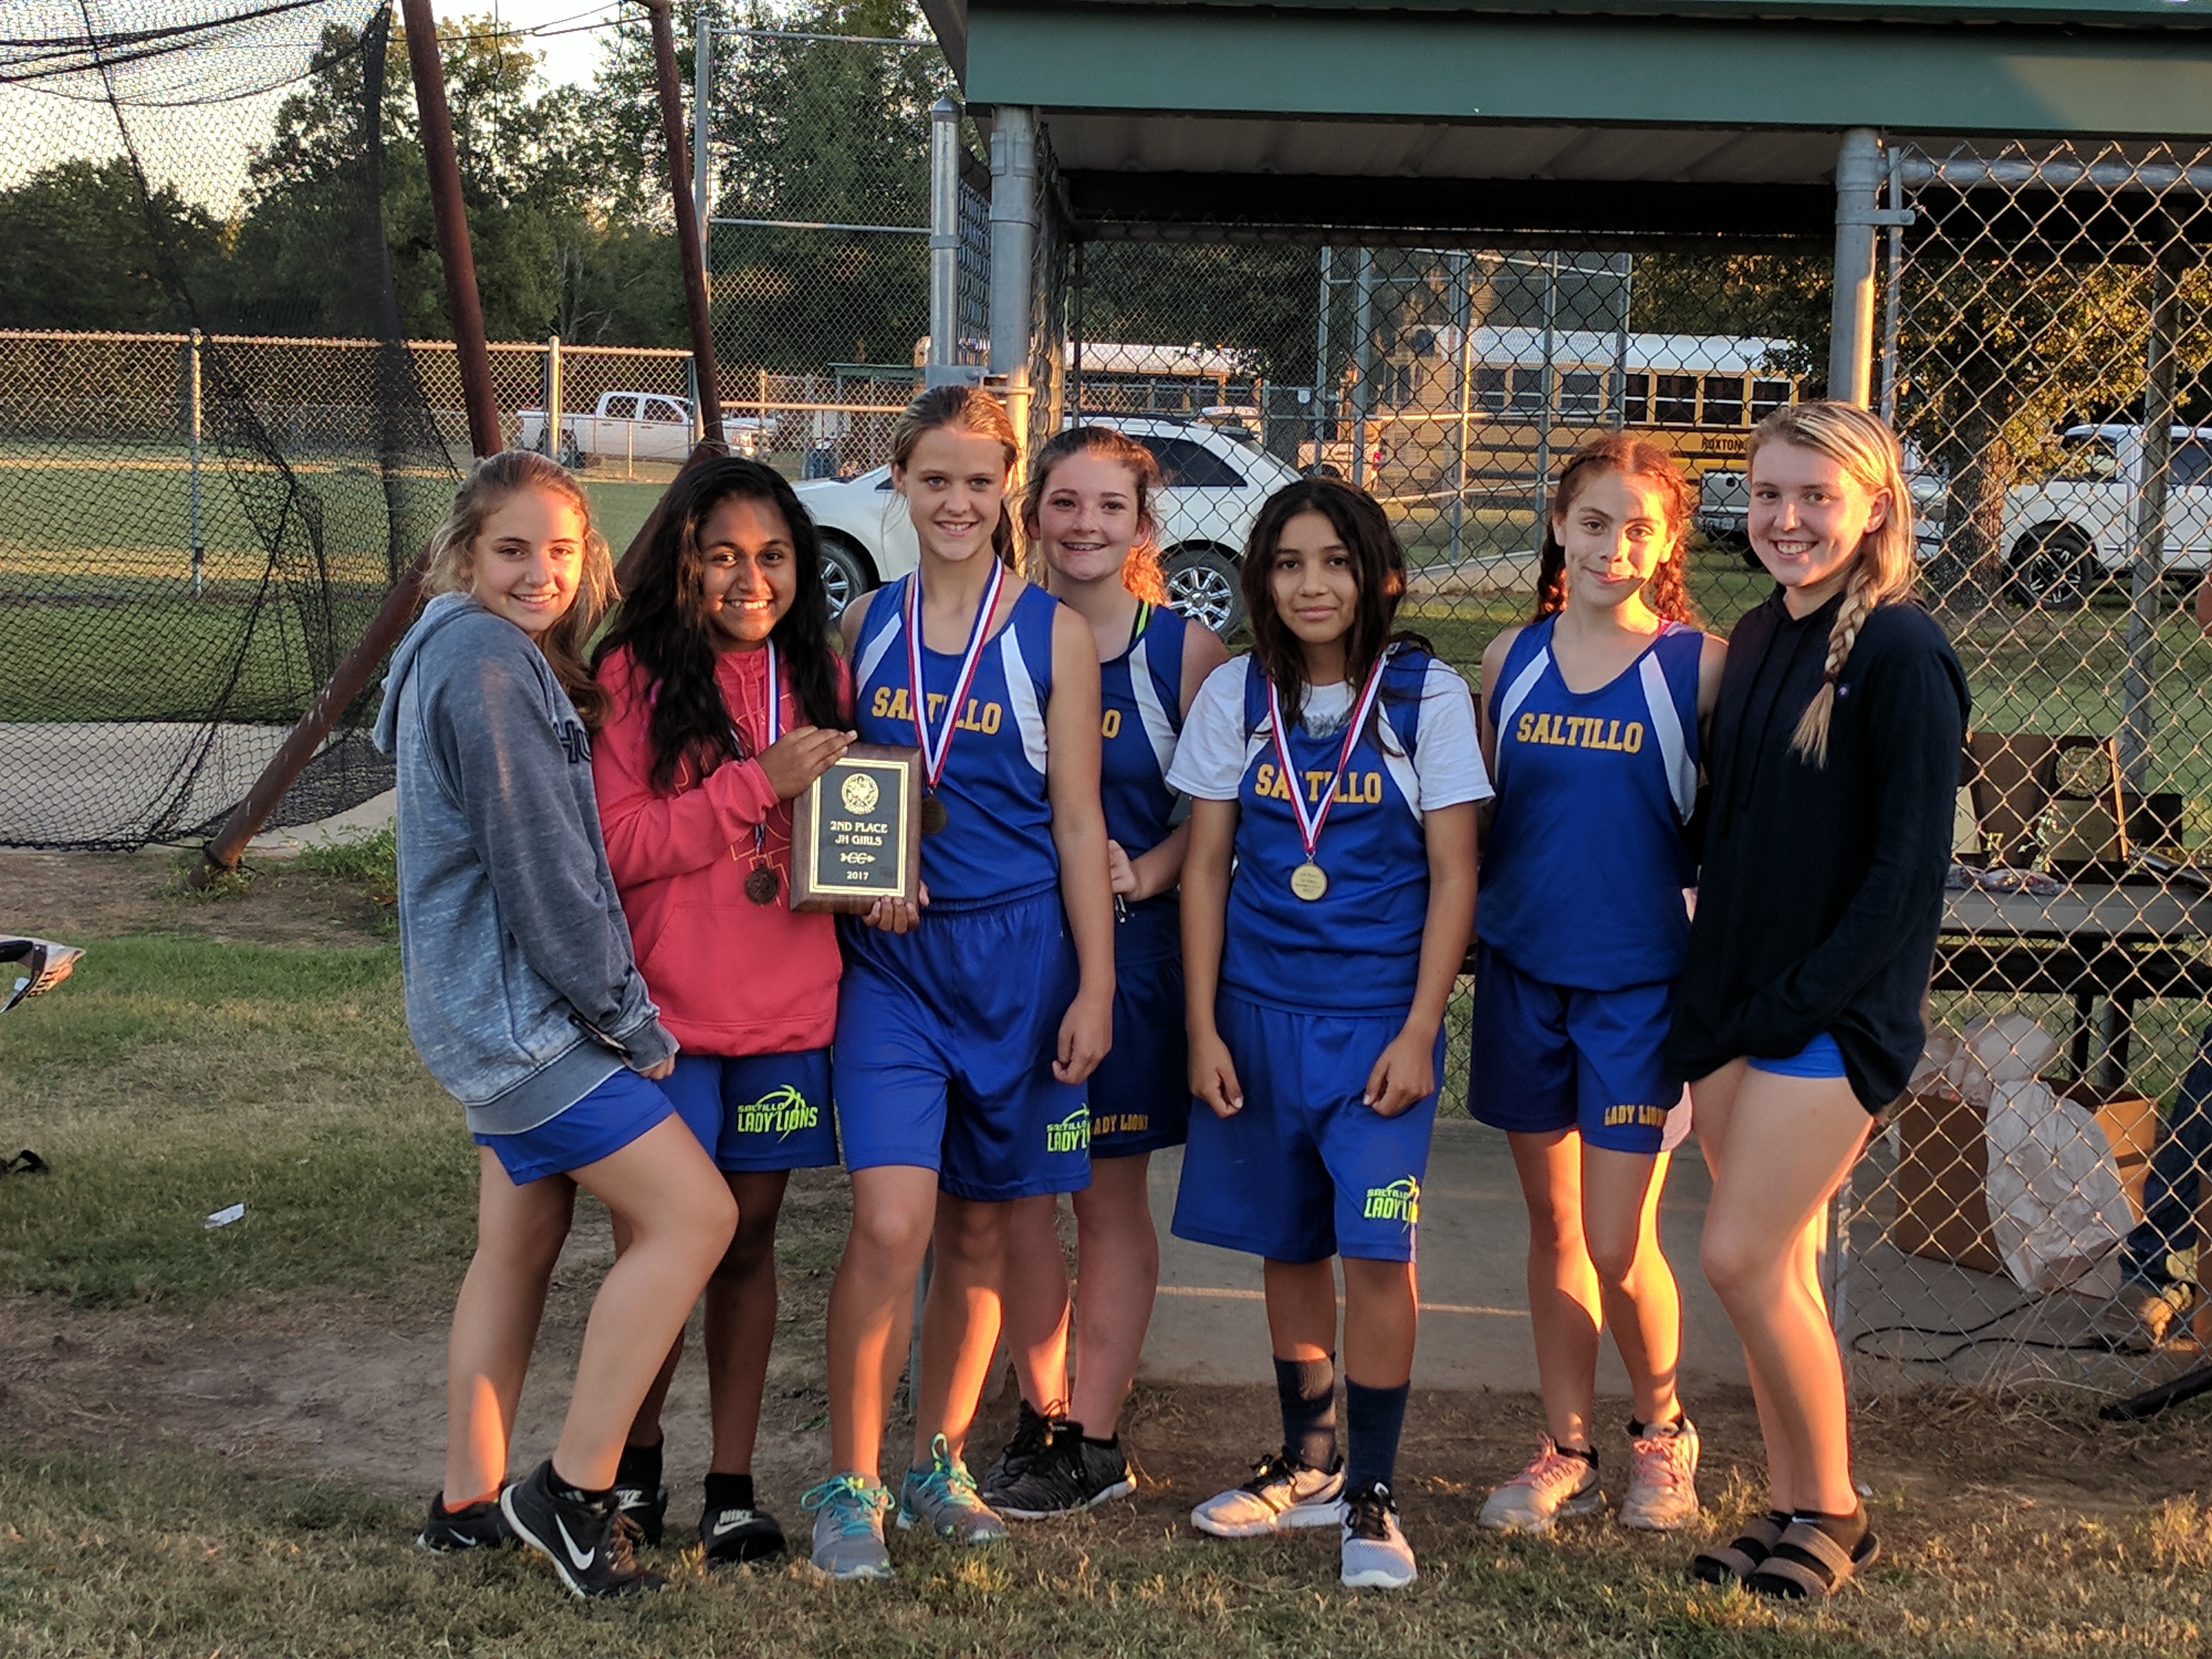 Saltillo District Cross Country Meet Results. Collins Places First for Varsity Girls. Both Varsity Teams Finish Second.